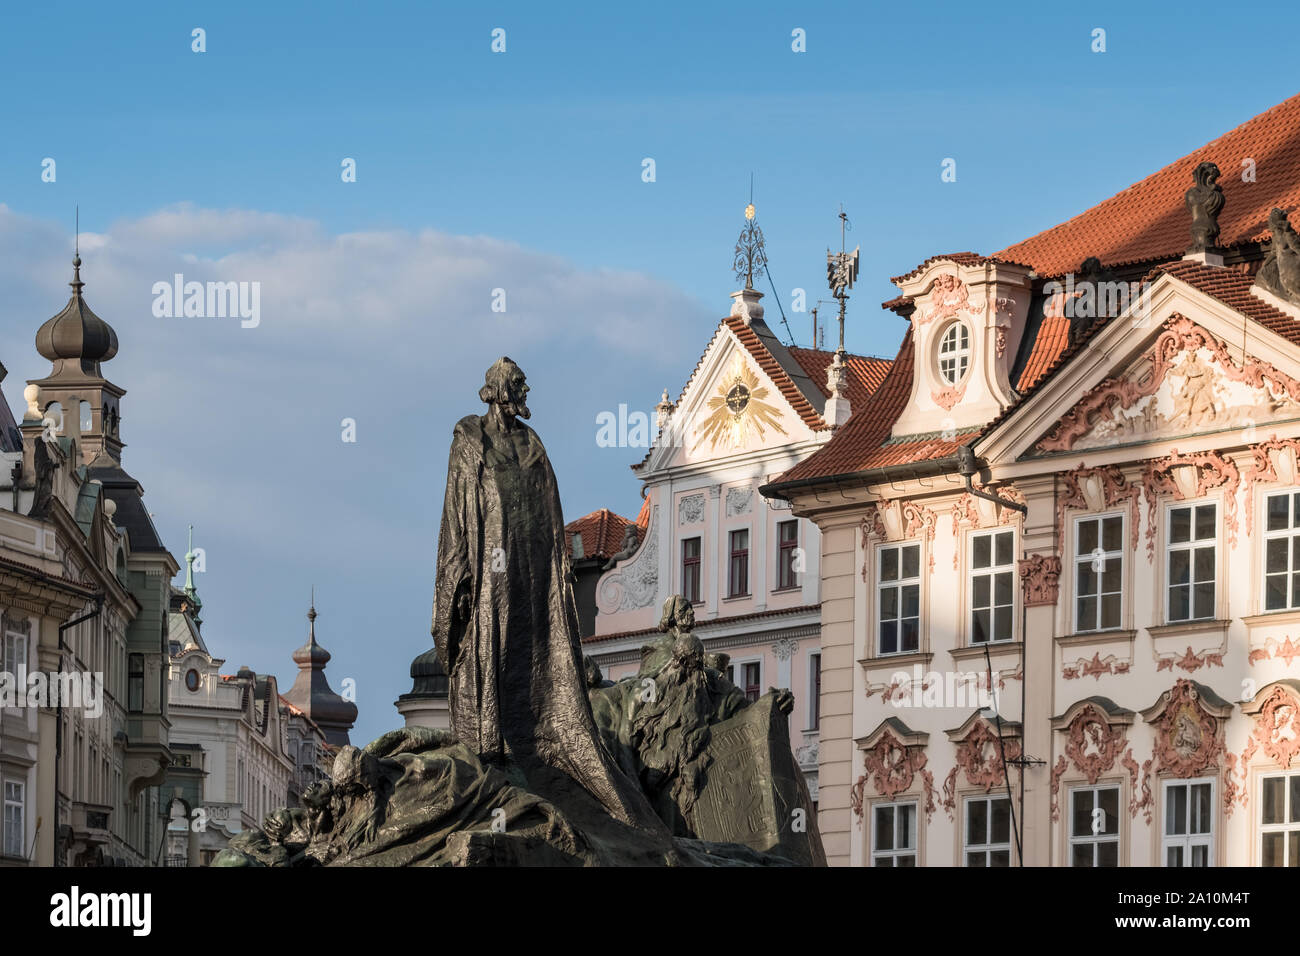 Jan Hus monument and architecture facades of Old Town Square, Stare Mesto, Prague, Czech Republic Stock Photo